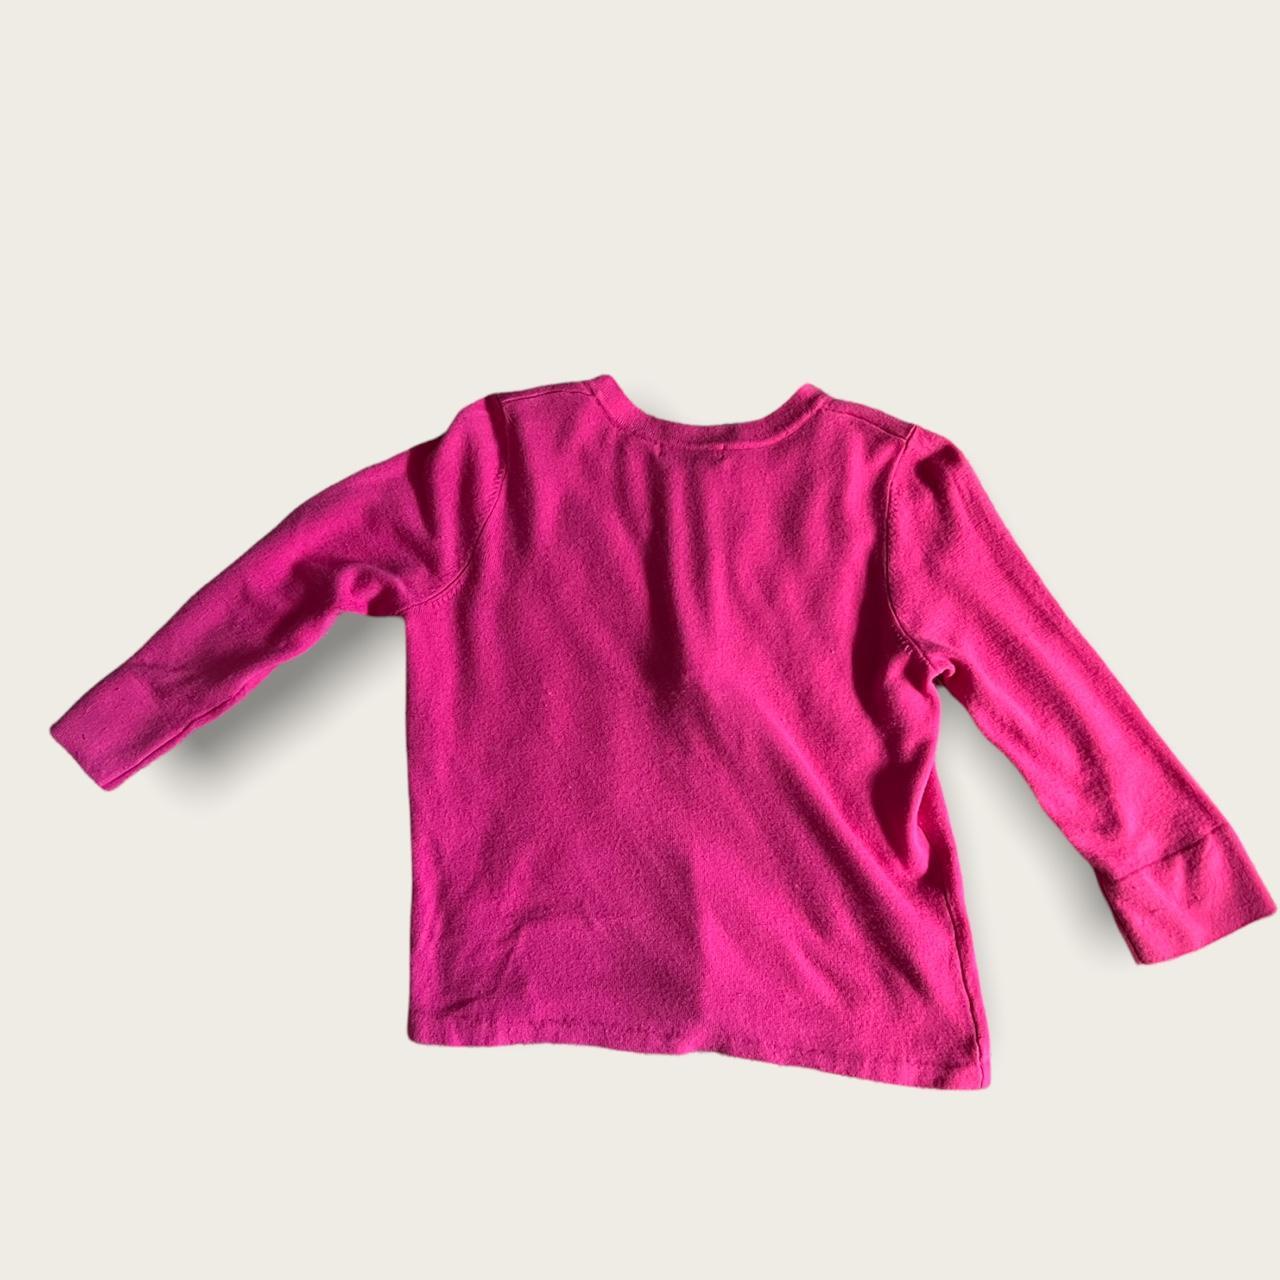 Femme Luxe Women's Pink and Silver Jumper (3)